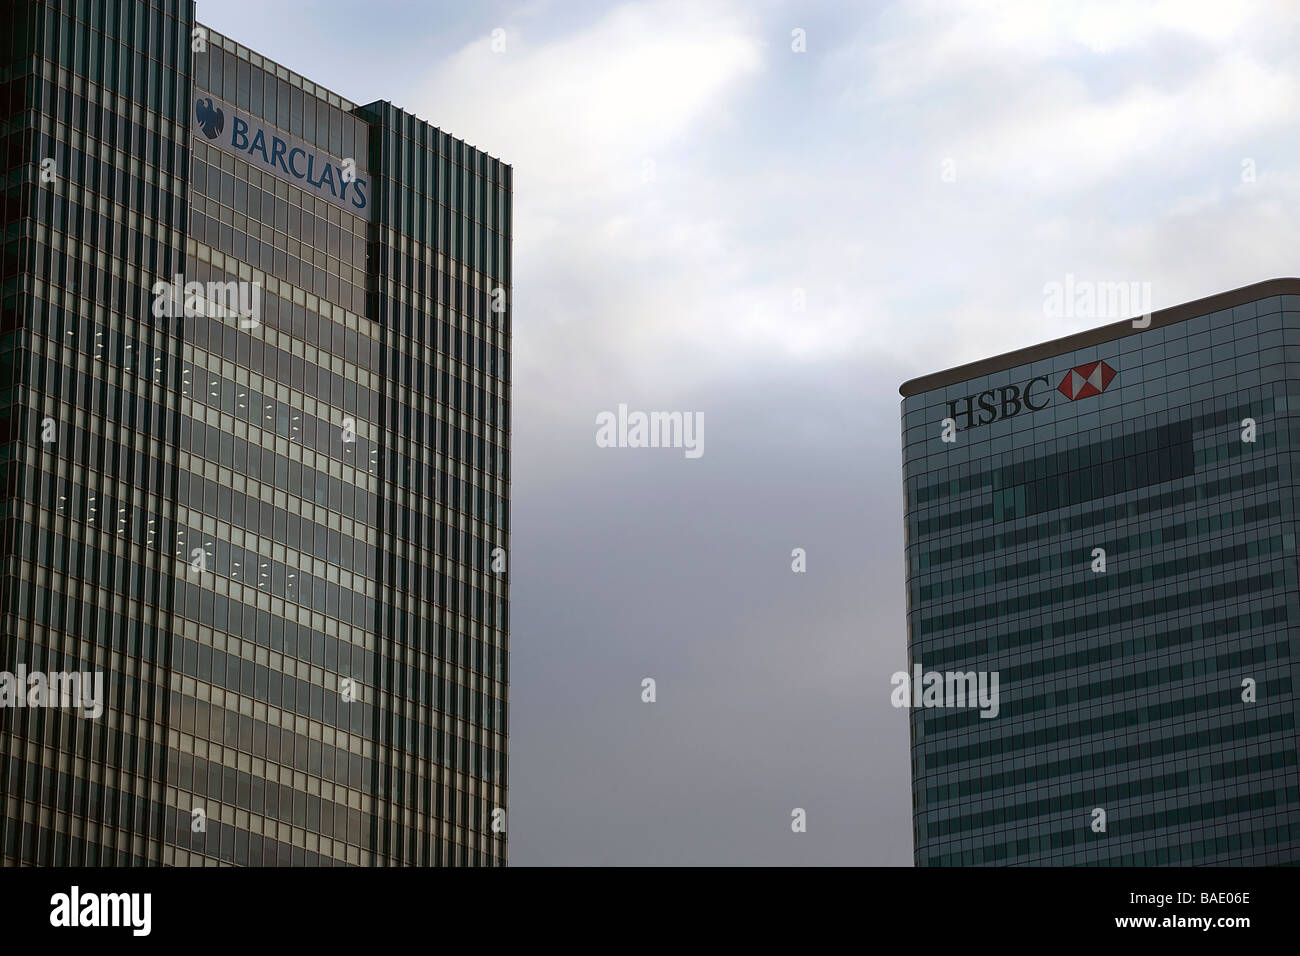 Banking giants: high-rise offices of HSBC and Barclays Stock Photo